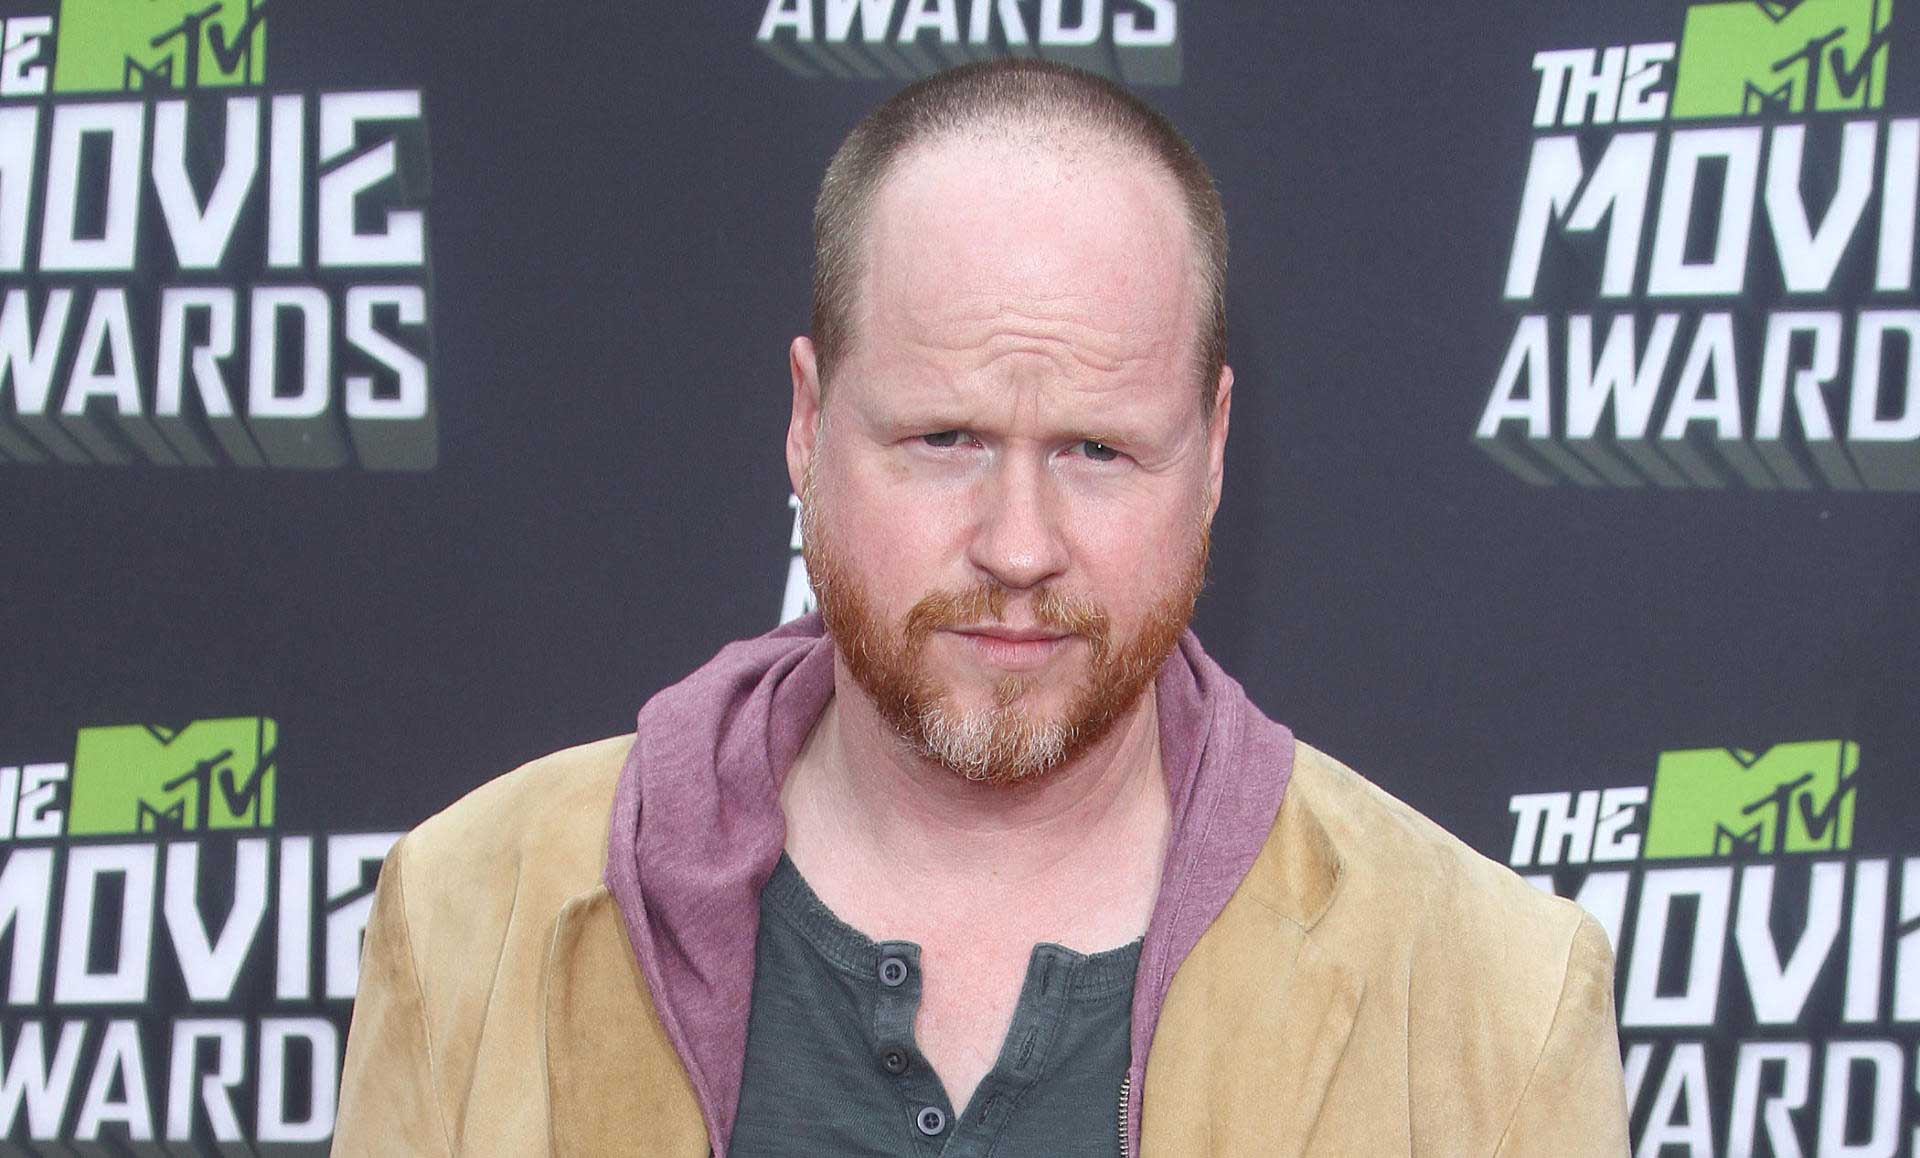 Joss Whedon Was an Asshole on the ‘Buffy’ Set, Too | The Blemish